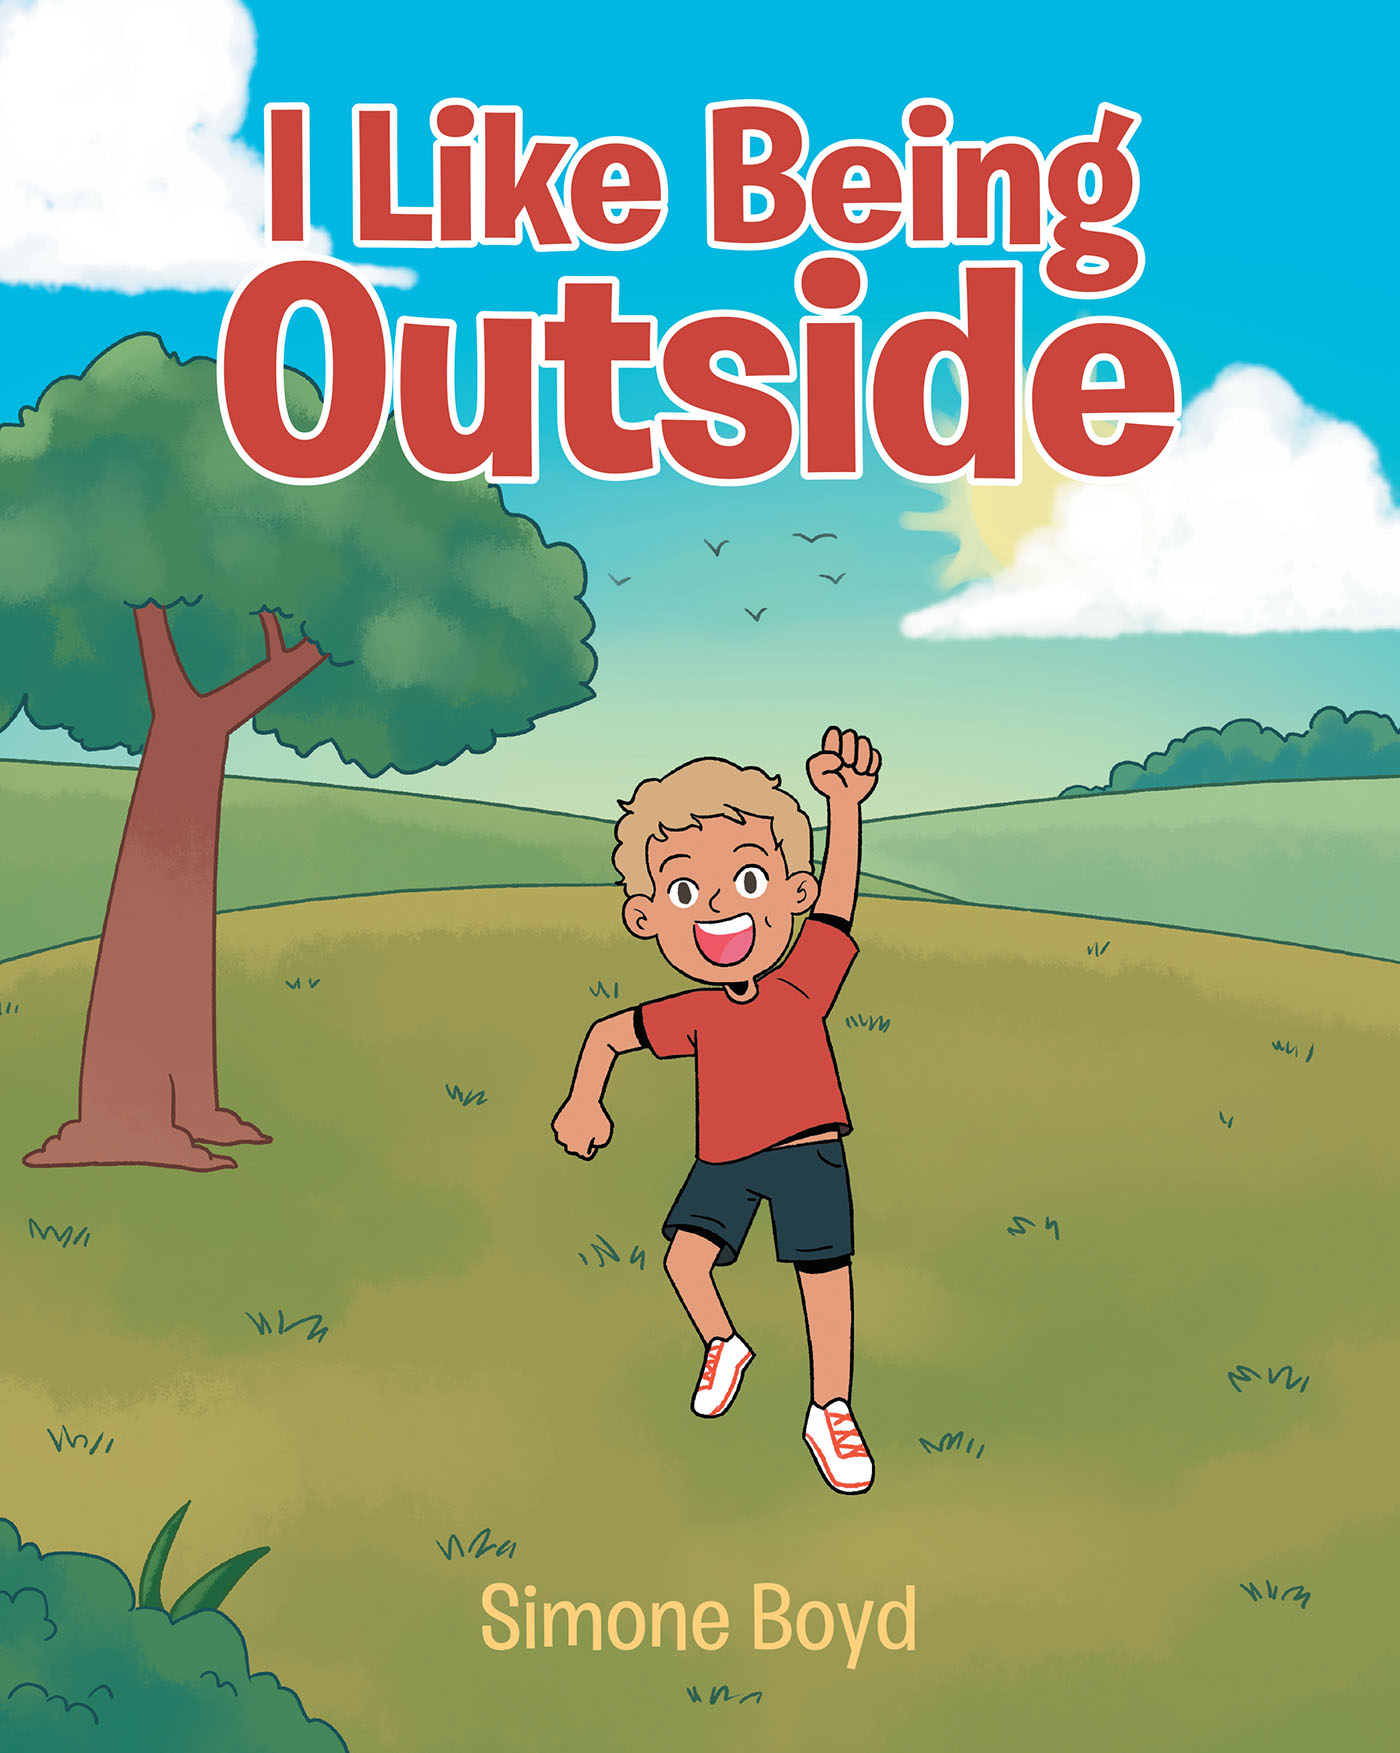 Author Simone Boyd’s New Book, "I Like Being Outside," is an Engaging Children’s Story That Celebrates All of the Fun to be Had Outdoors